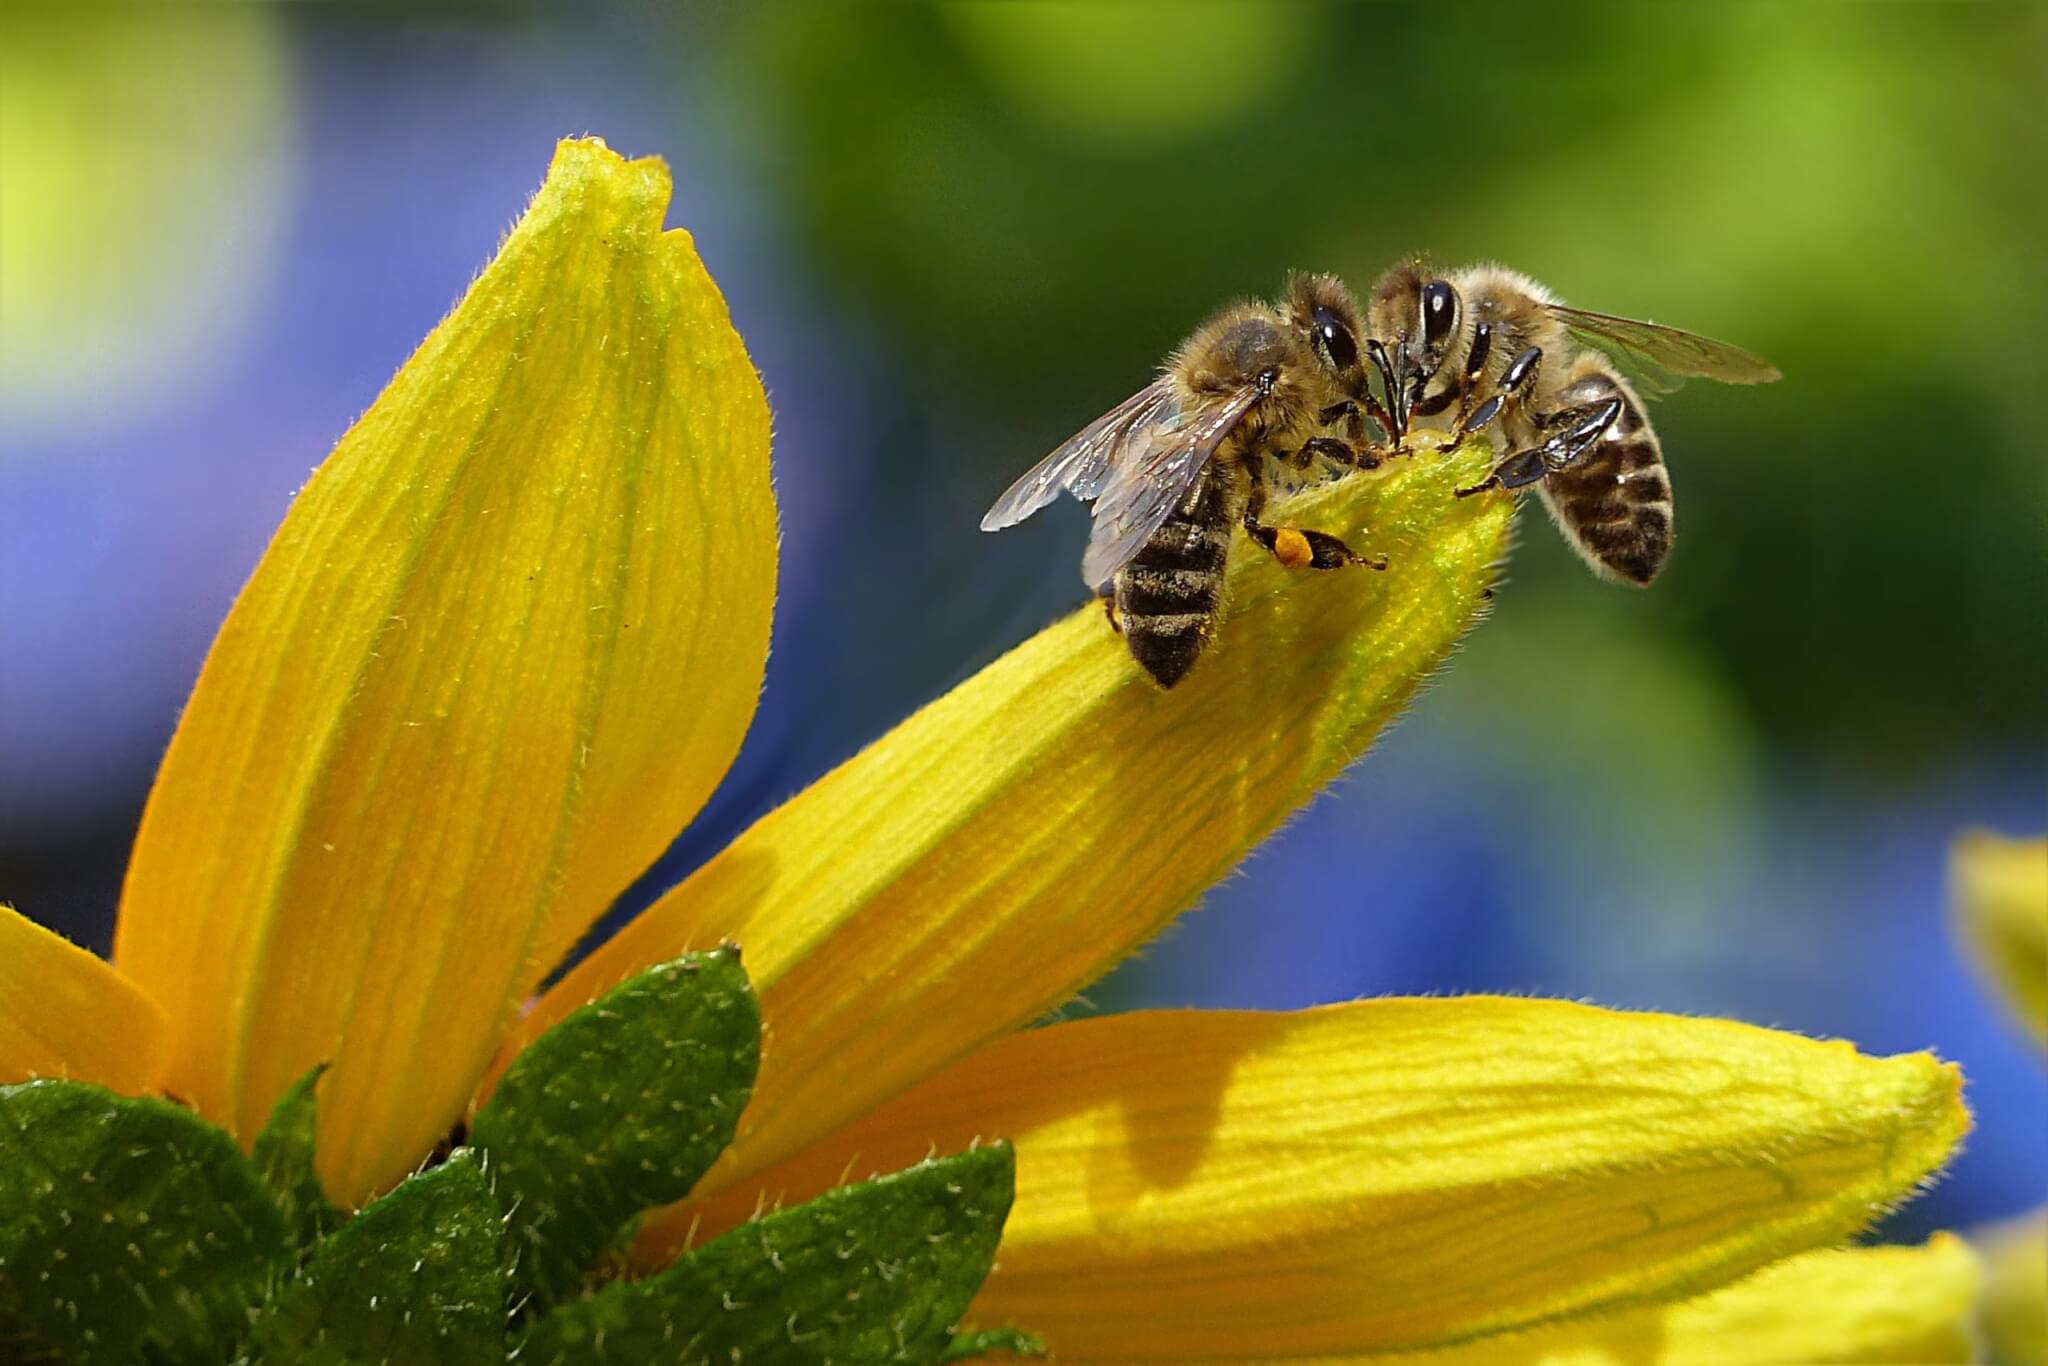 Honey bees are dying twice as fast as they did 50 years ago